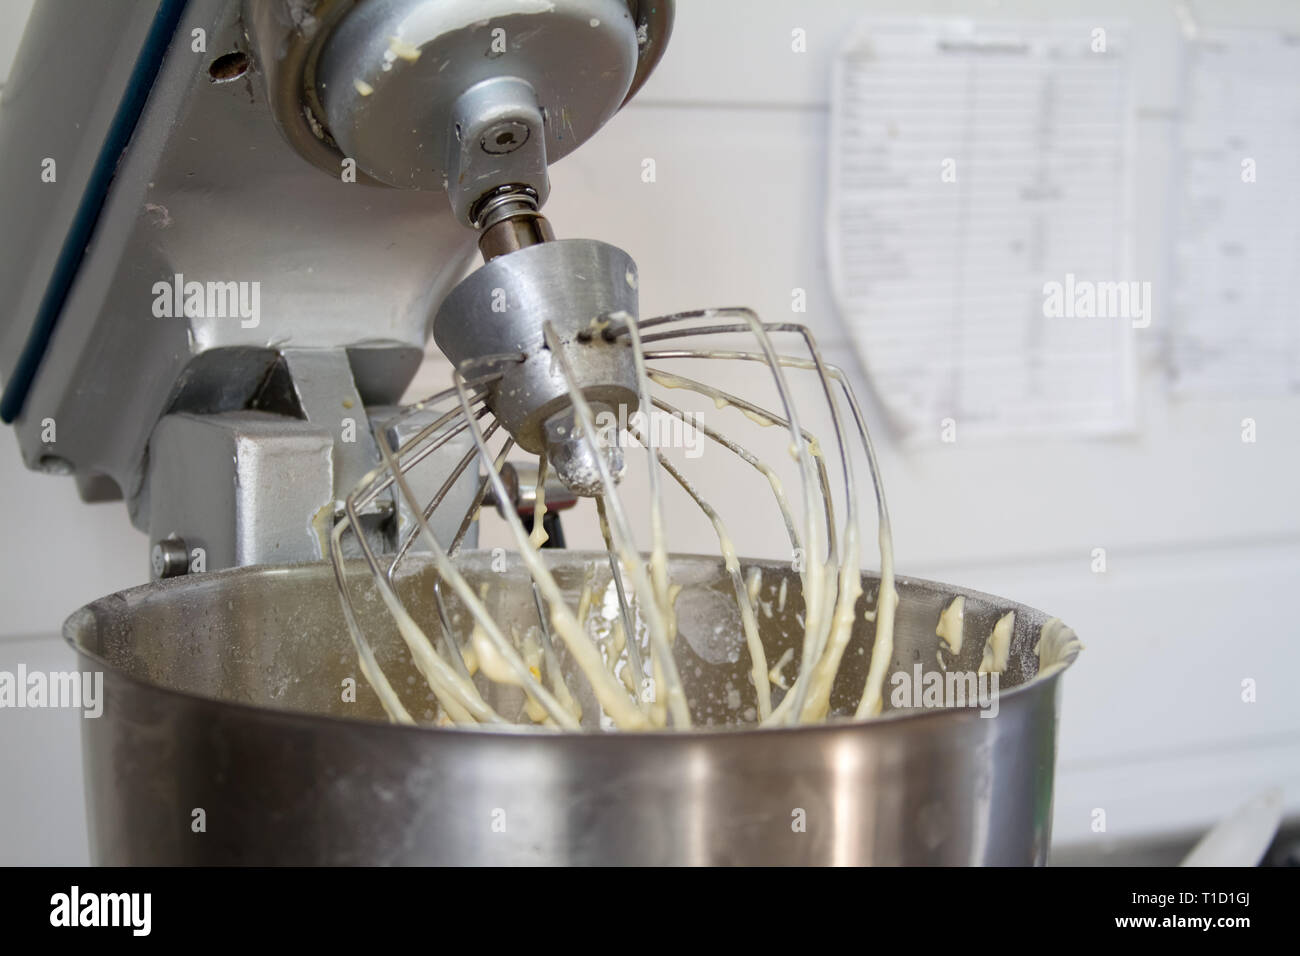 https://c8.alamy.com/comp/T1D1GJ/closeup-of-electric-mixer-with-whipped-smooth-dough-for-cake-batter-being-whipped-mixing-white-dough-in-bowl-with-motor-mixer-baking-cake-T1D1GJ.jpg